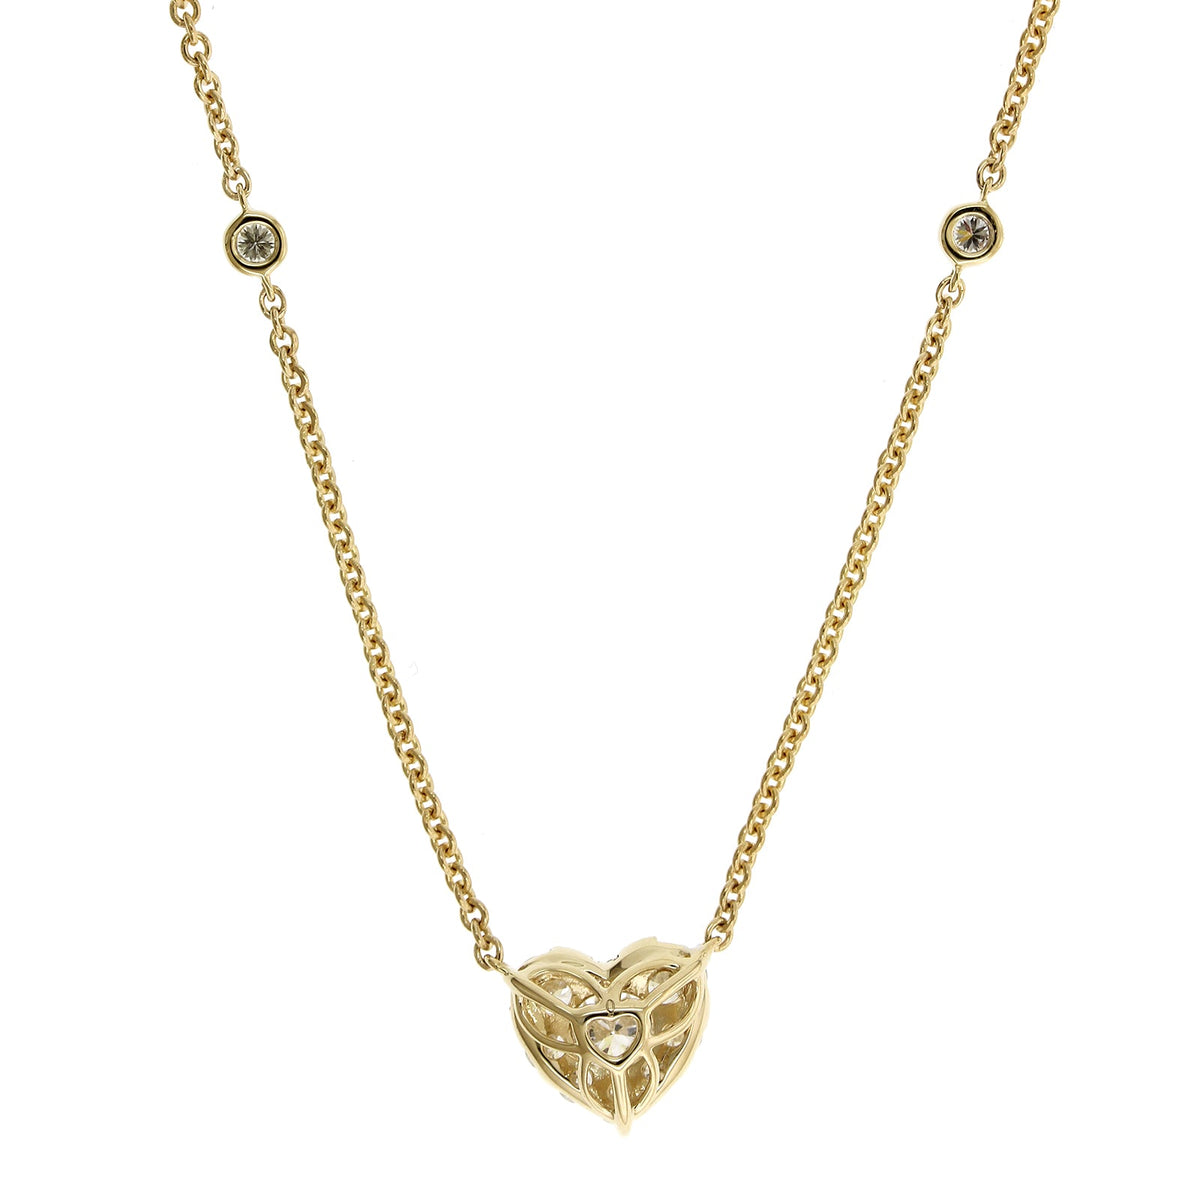 14K Yellow Gold Diamond Cluster Heart Shaped Necklace